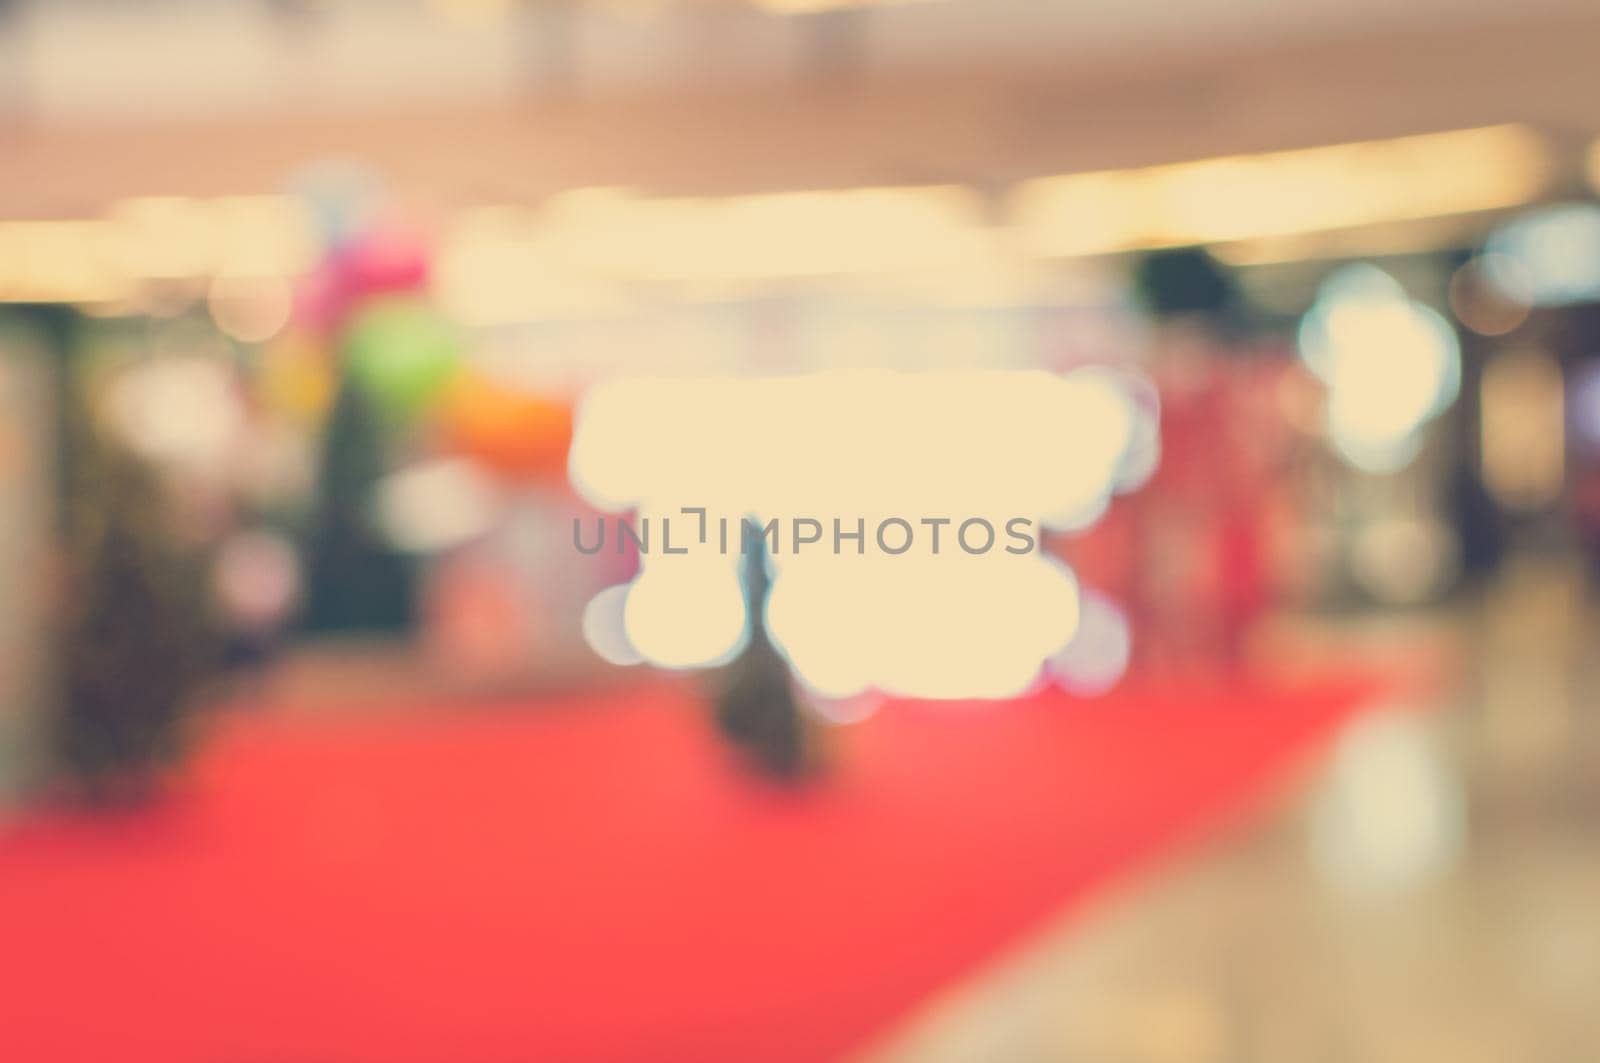 Vintage Style - Abstract background of shopping mall, shallow depth of focus.